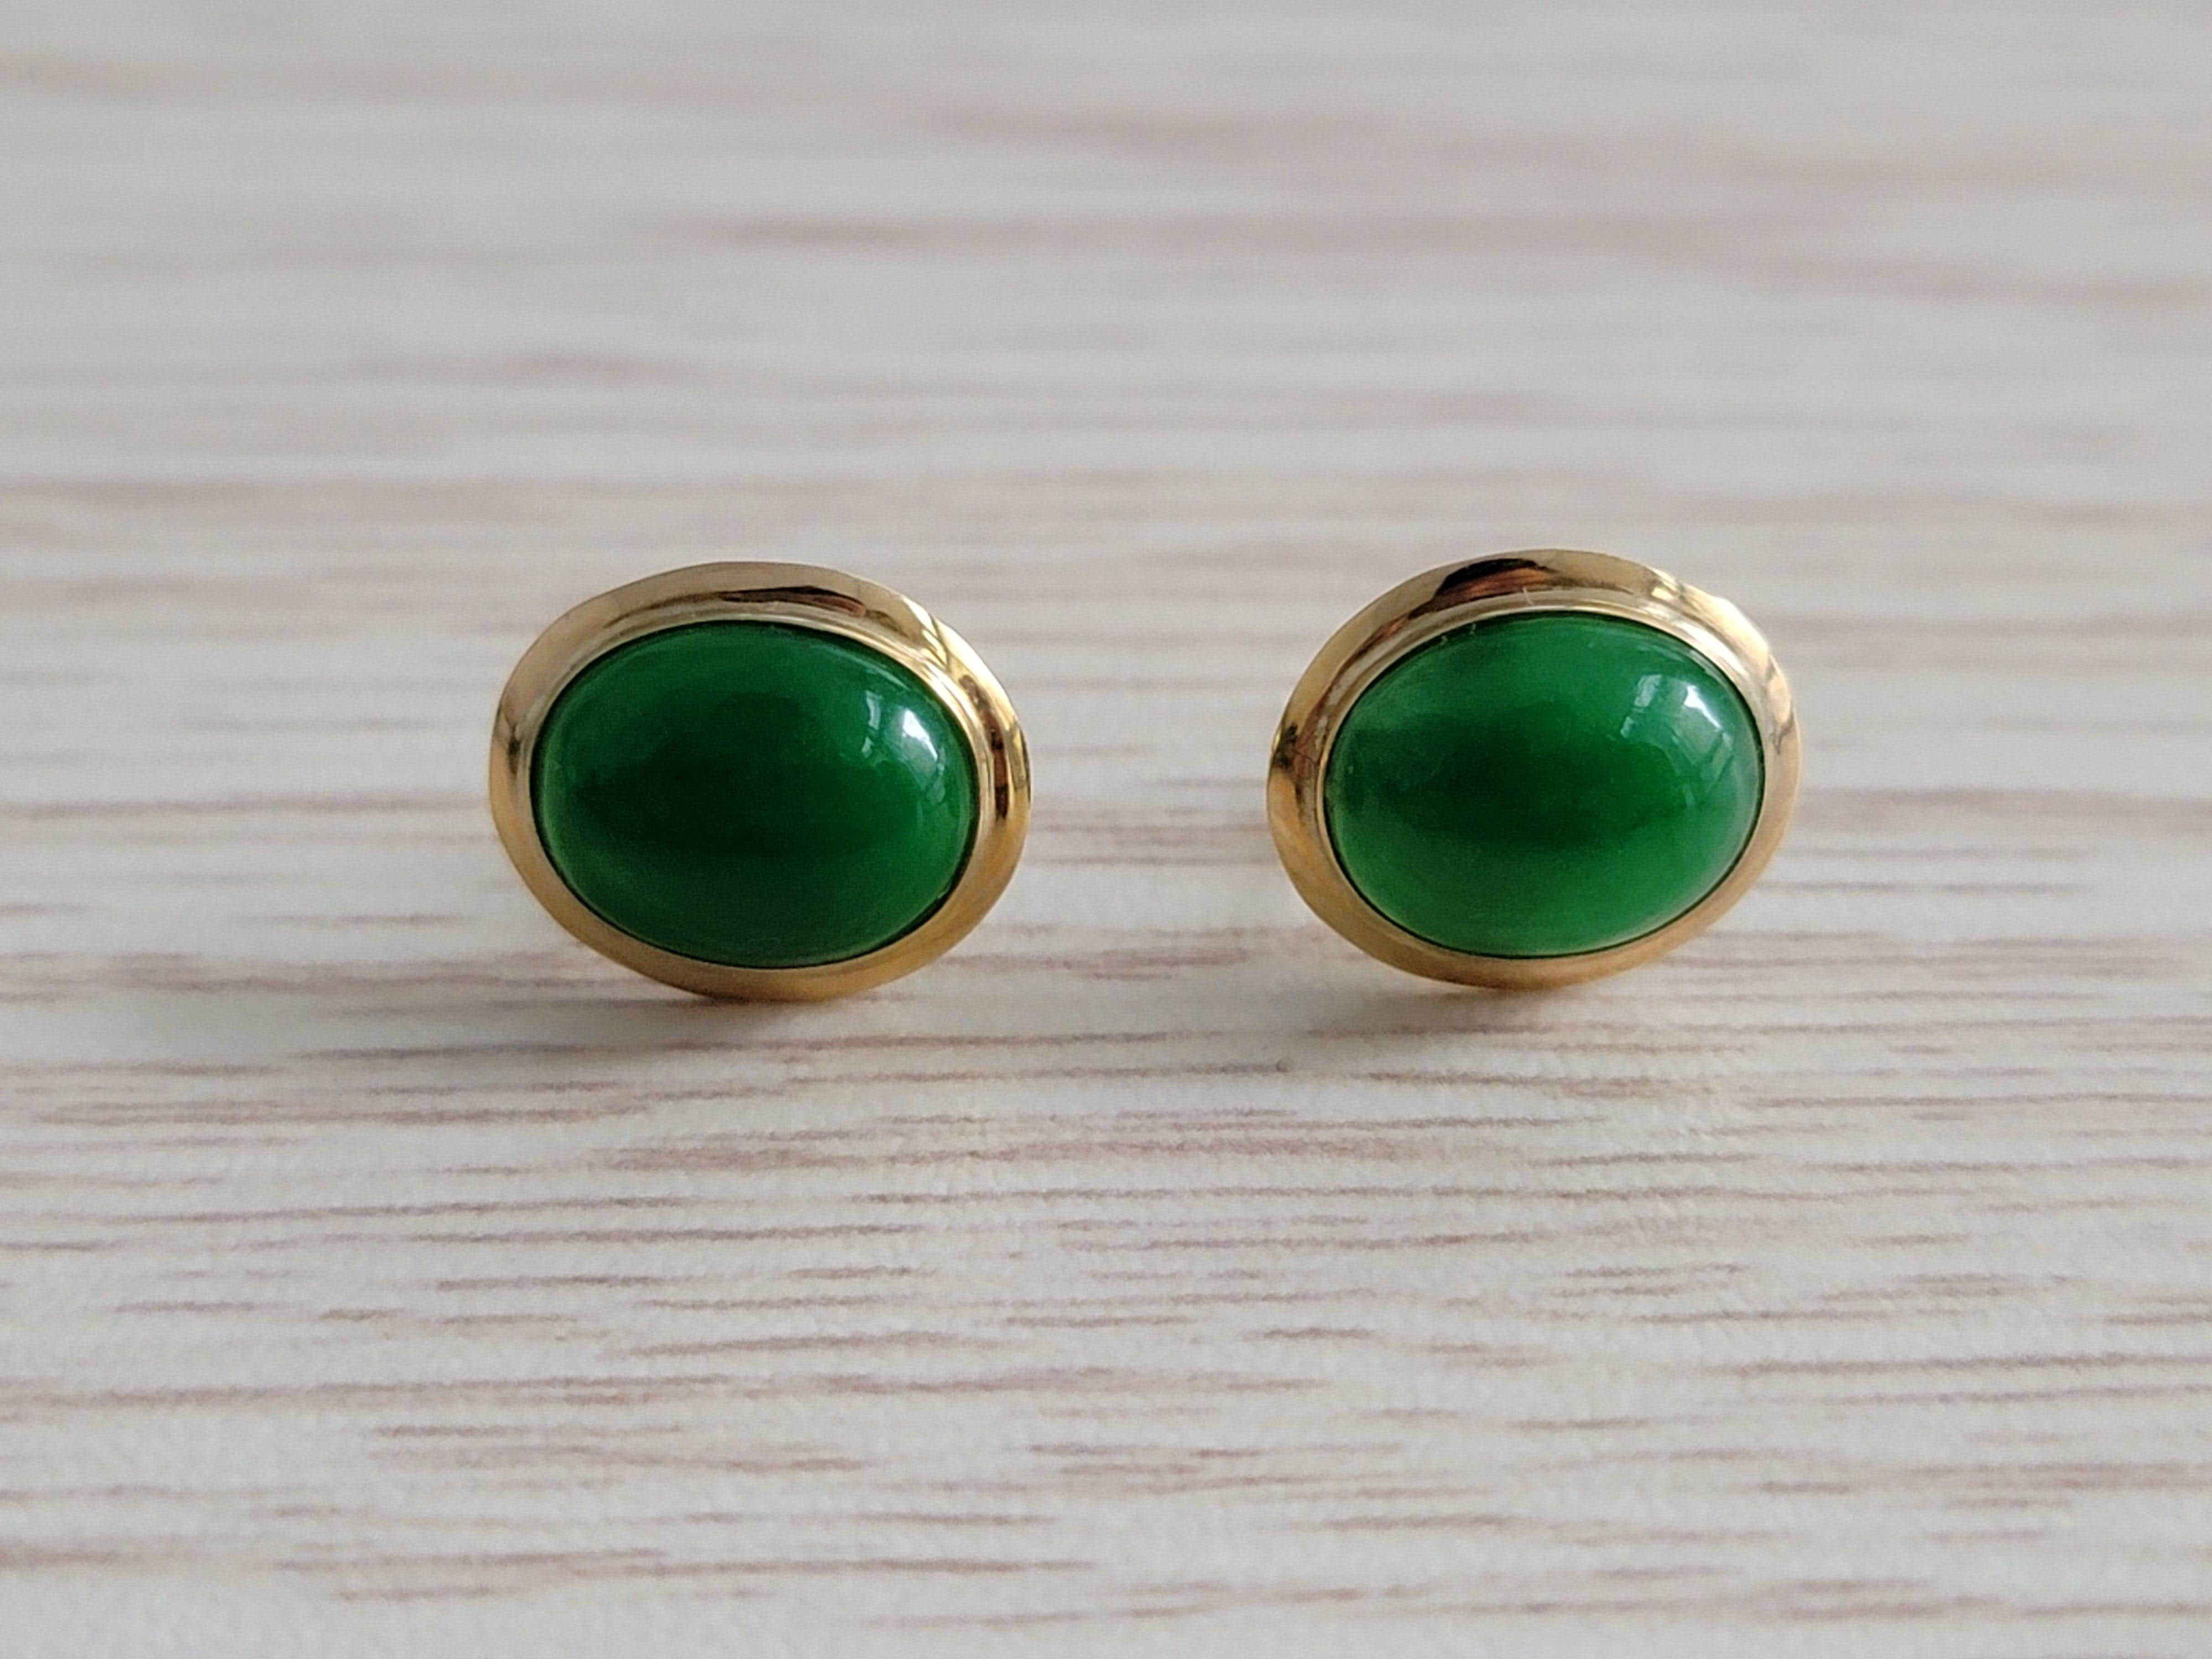 Cabochon Qīng Zhong Green Jade Stud Earrings with solid 14K Yellow Gold For Sale